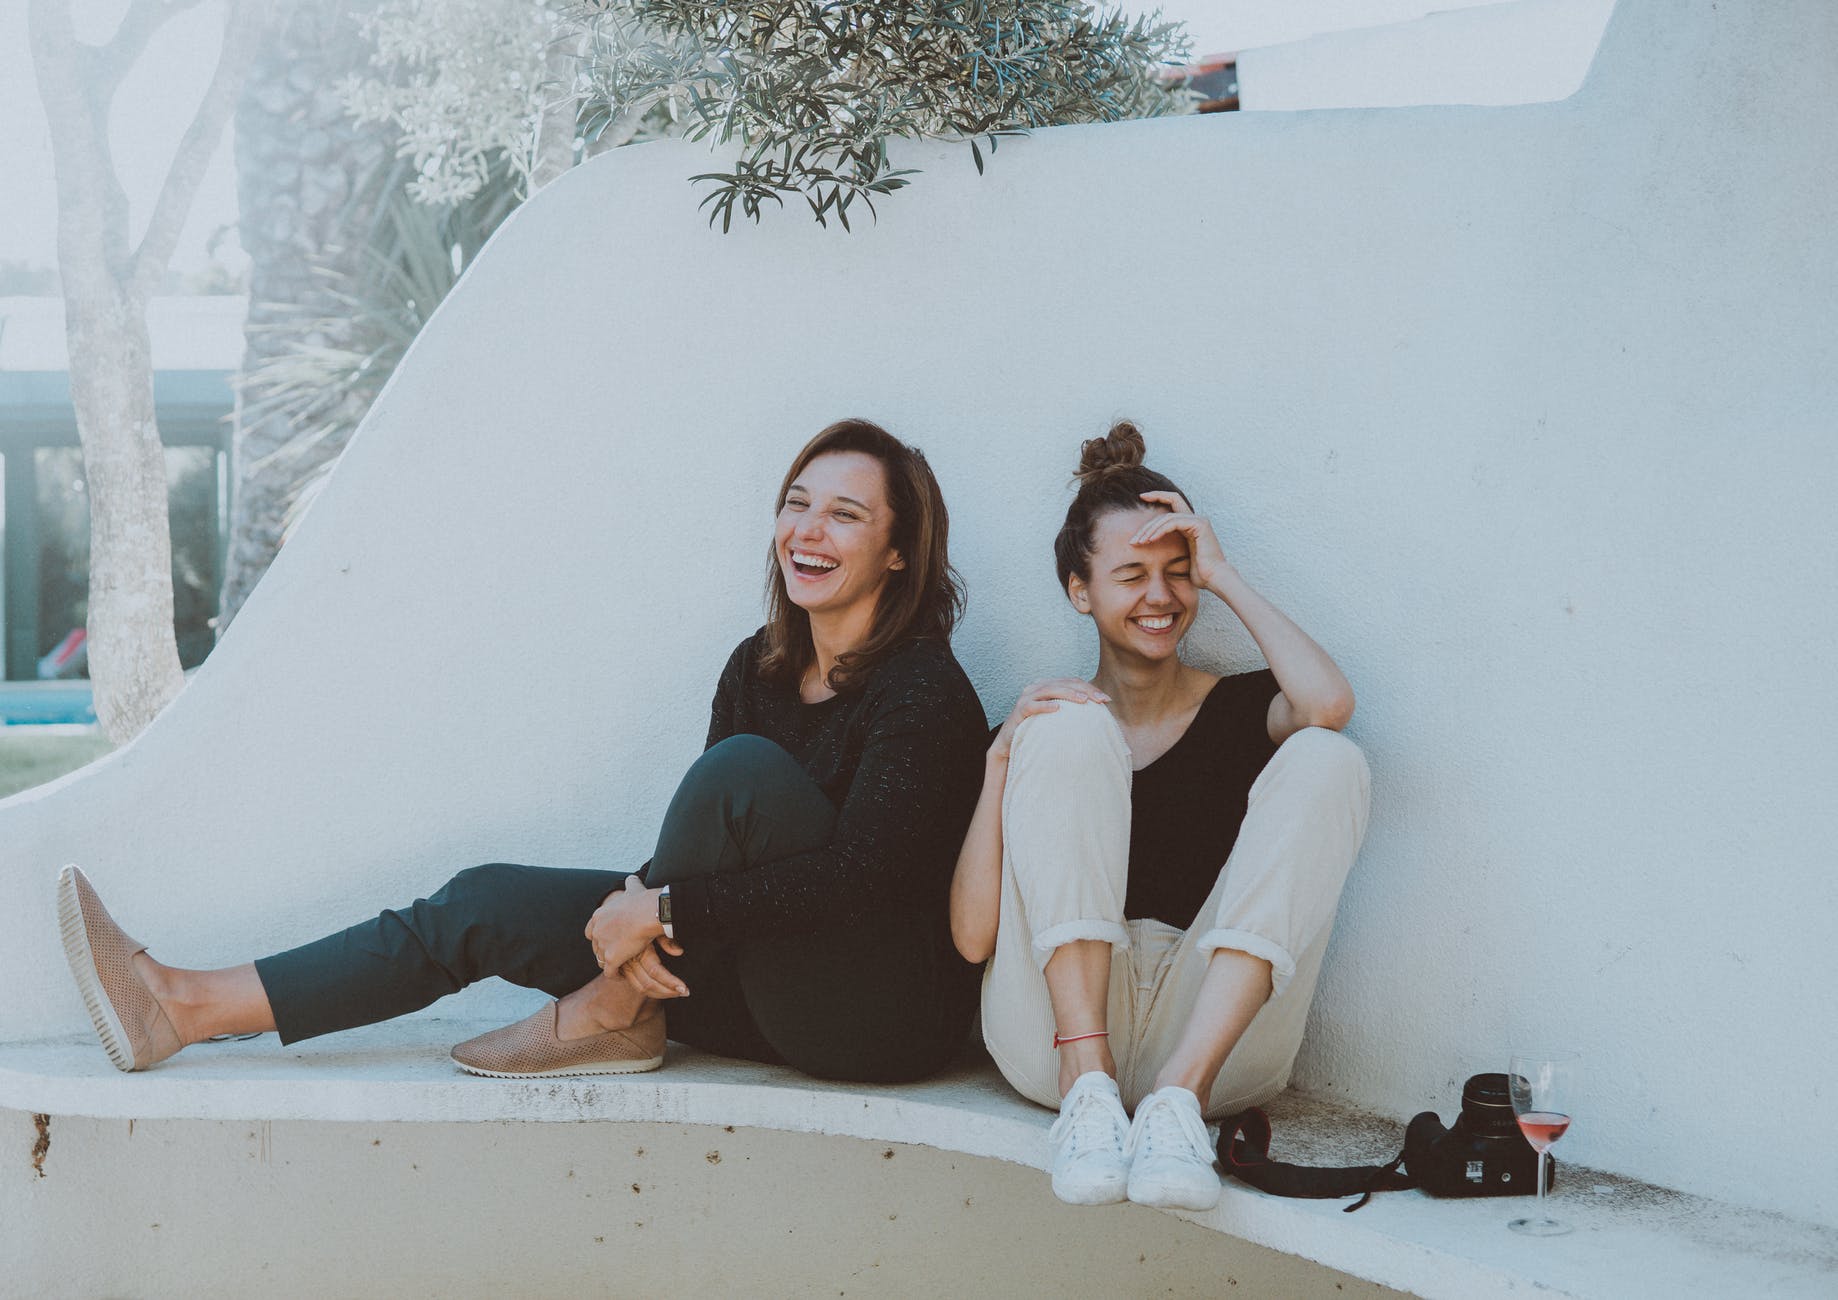 Two sisters laughing together | Photo: Pexels